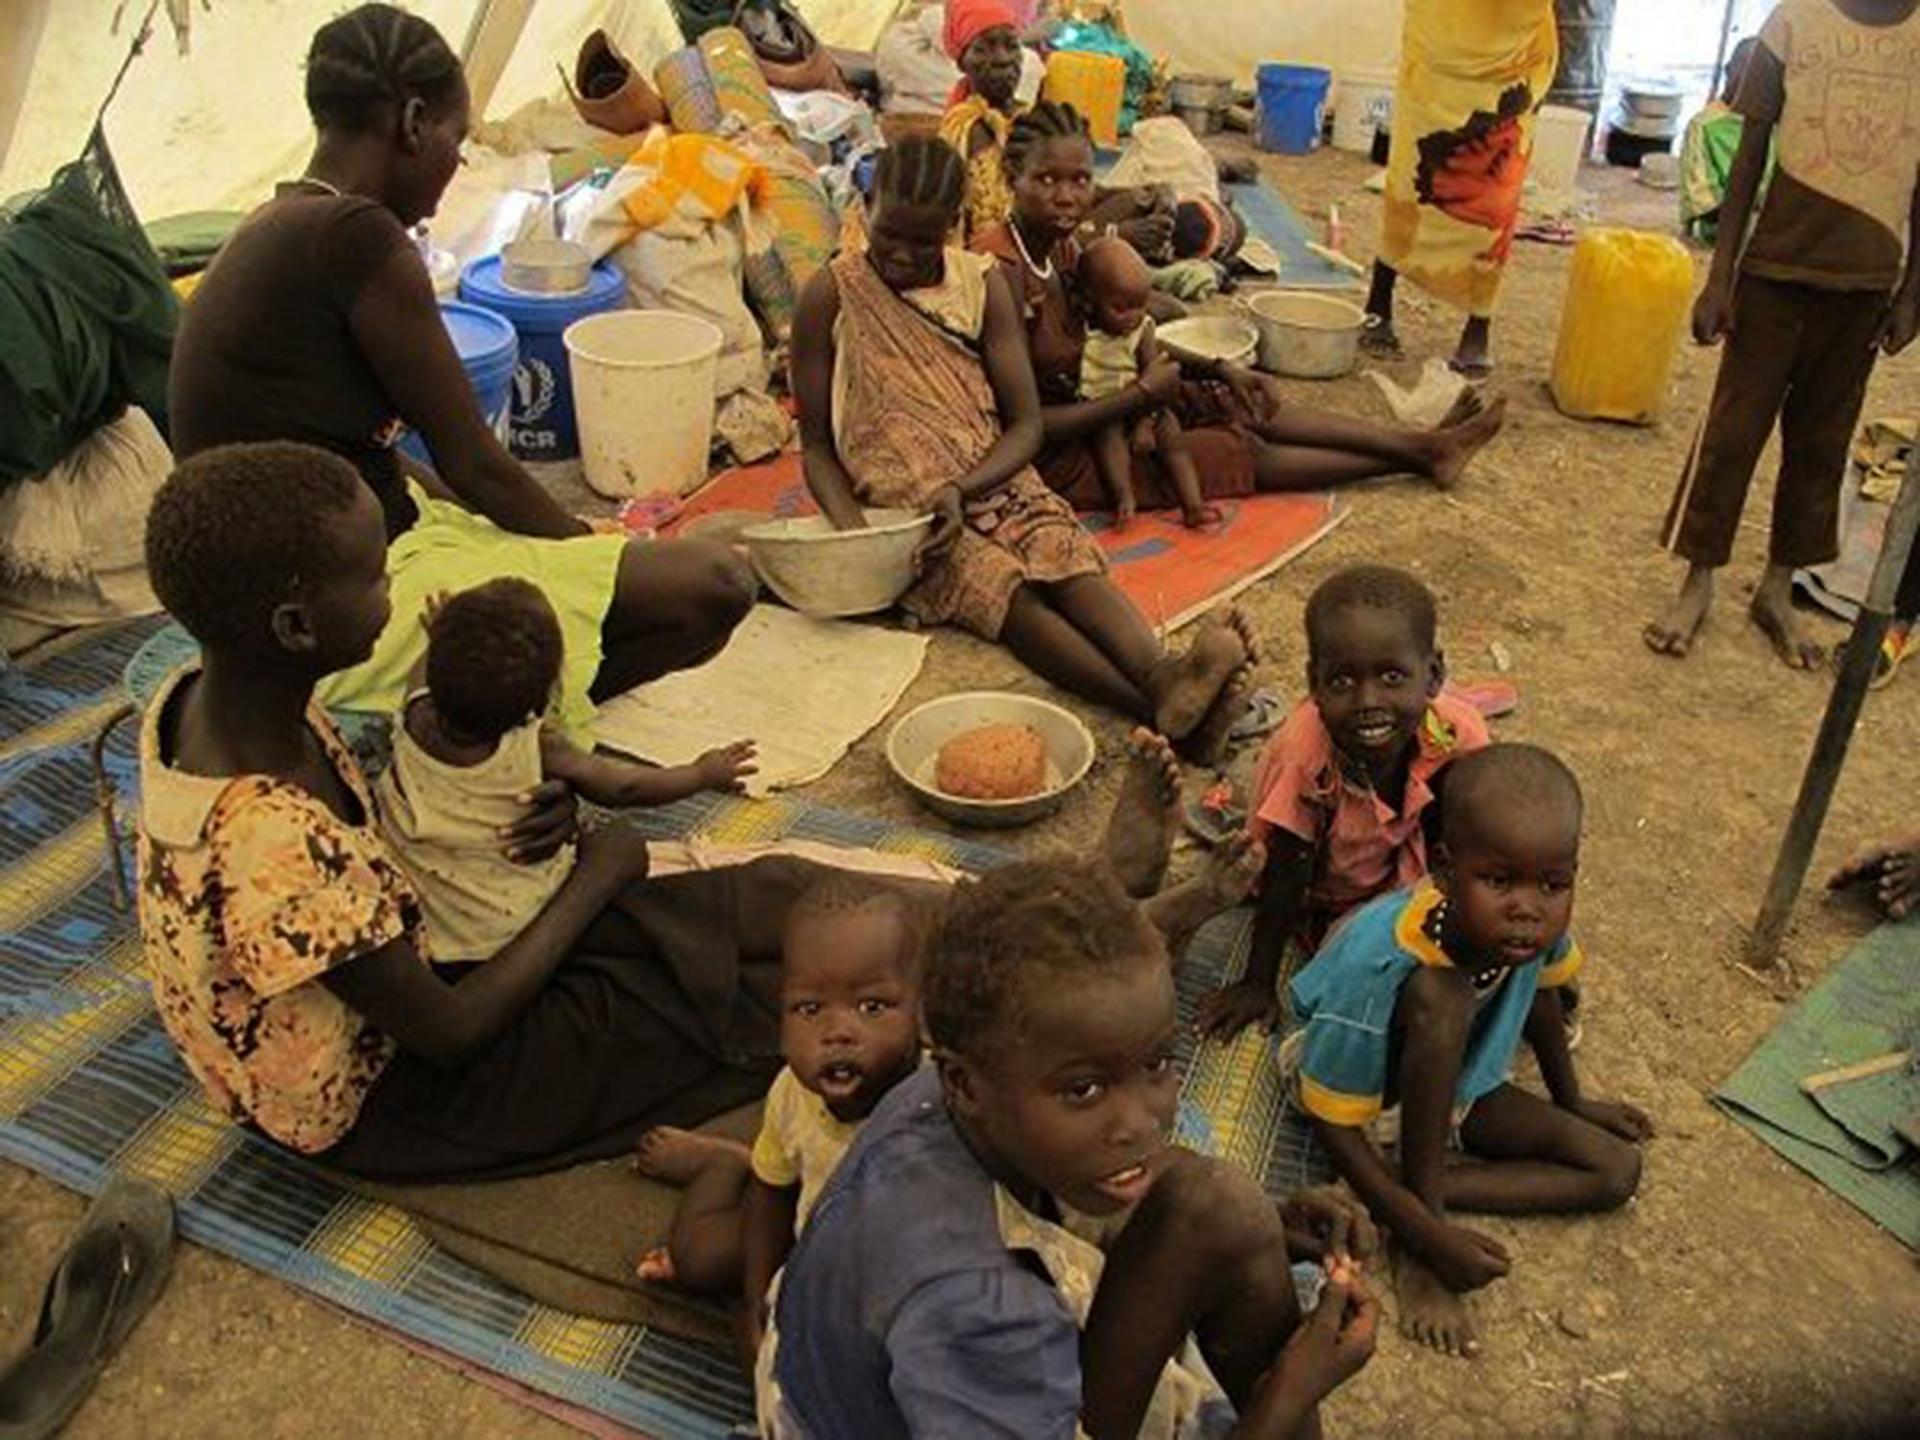 "The situation has been tense" - Dr Niamh in South Sudan